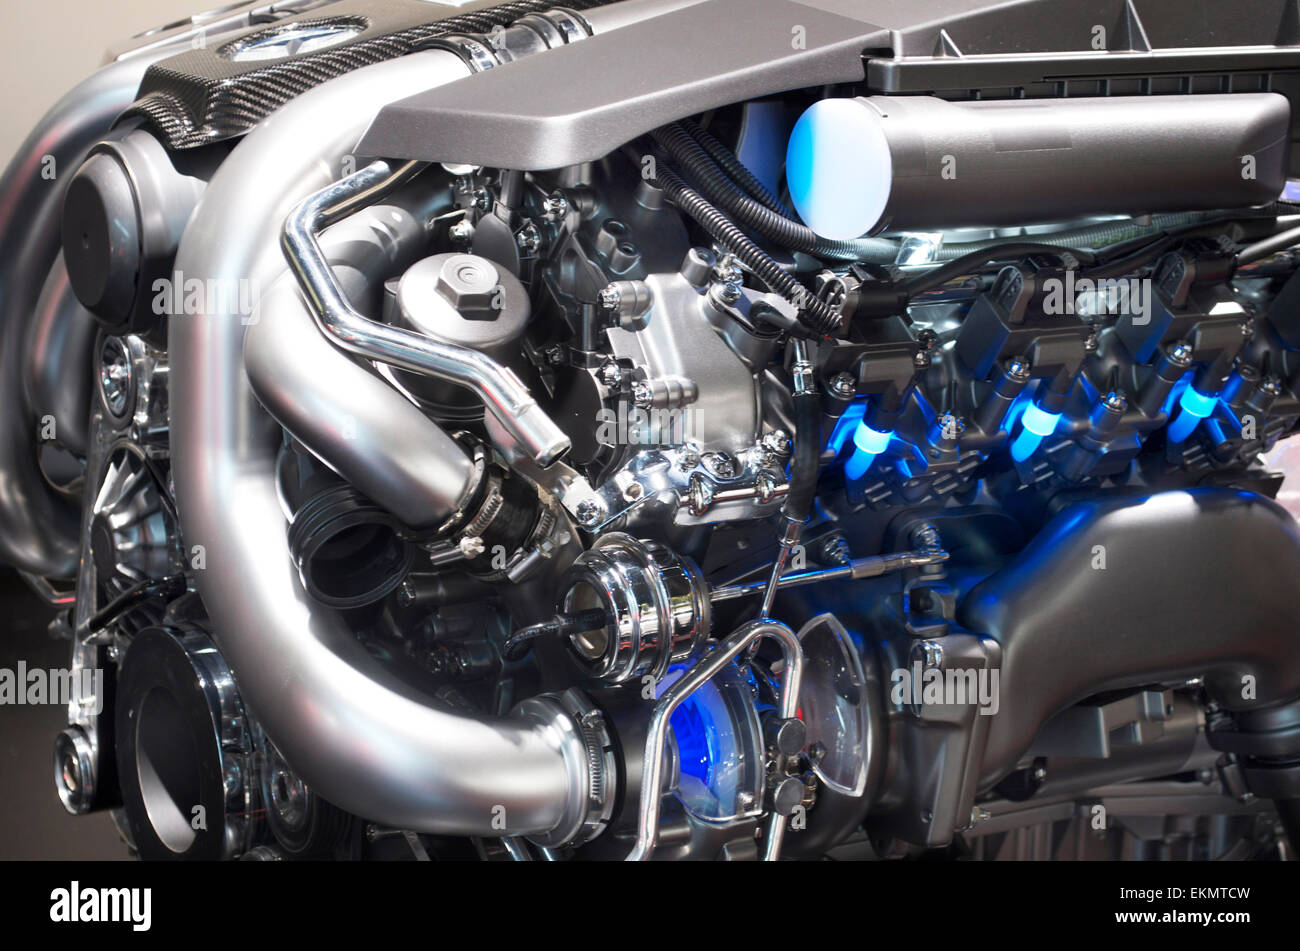 Clean automotive motor with blue lights, displayed at the Detroit International Auto Show. Stock Photo